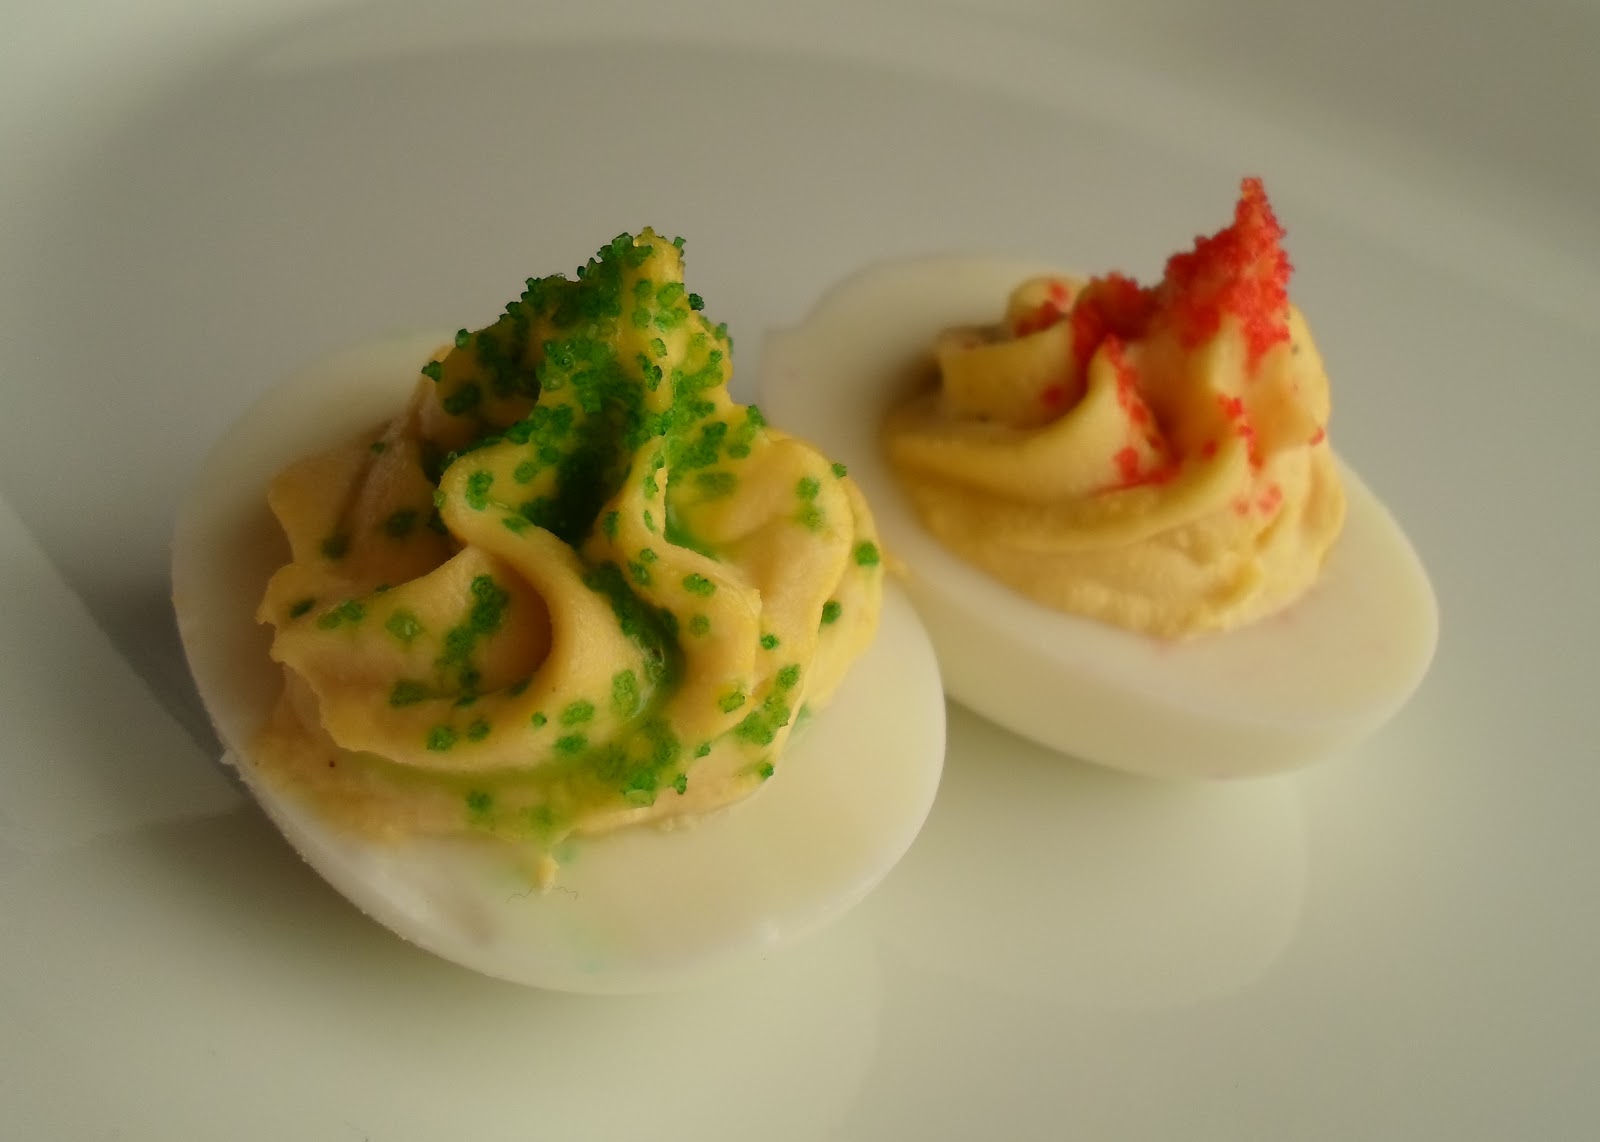 Best Christmas Deviled Eggs Recipe - How to Make Christmas Deviled Eggs